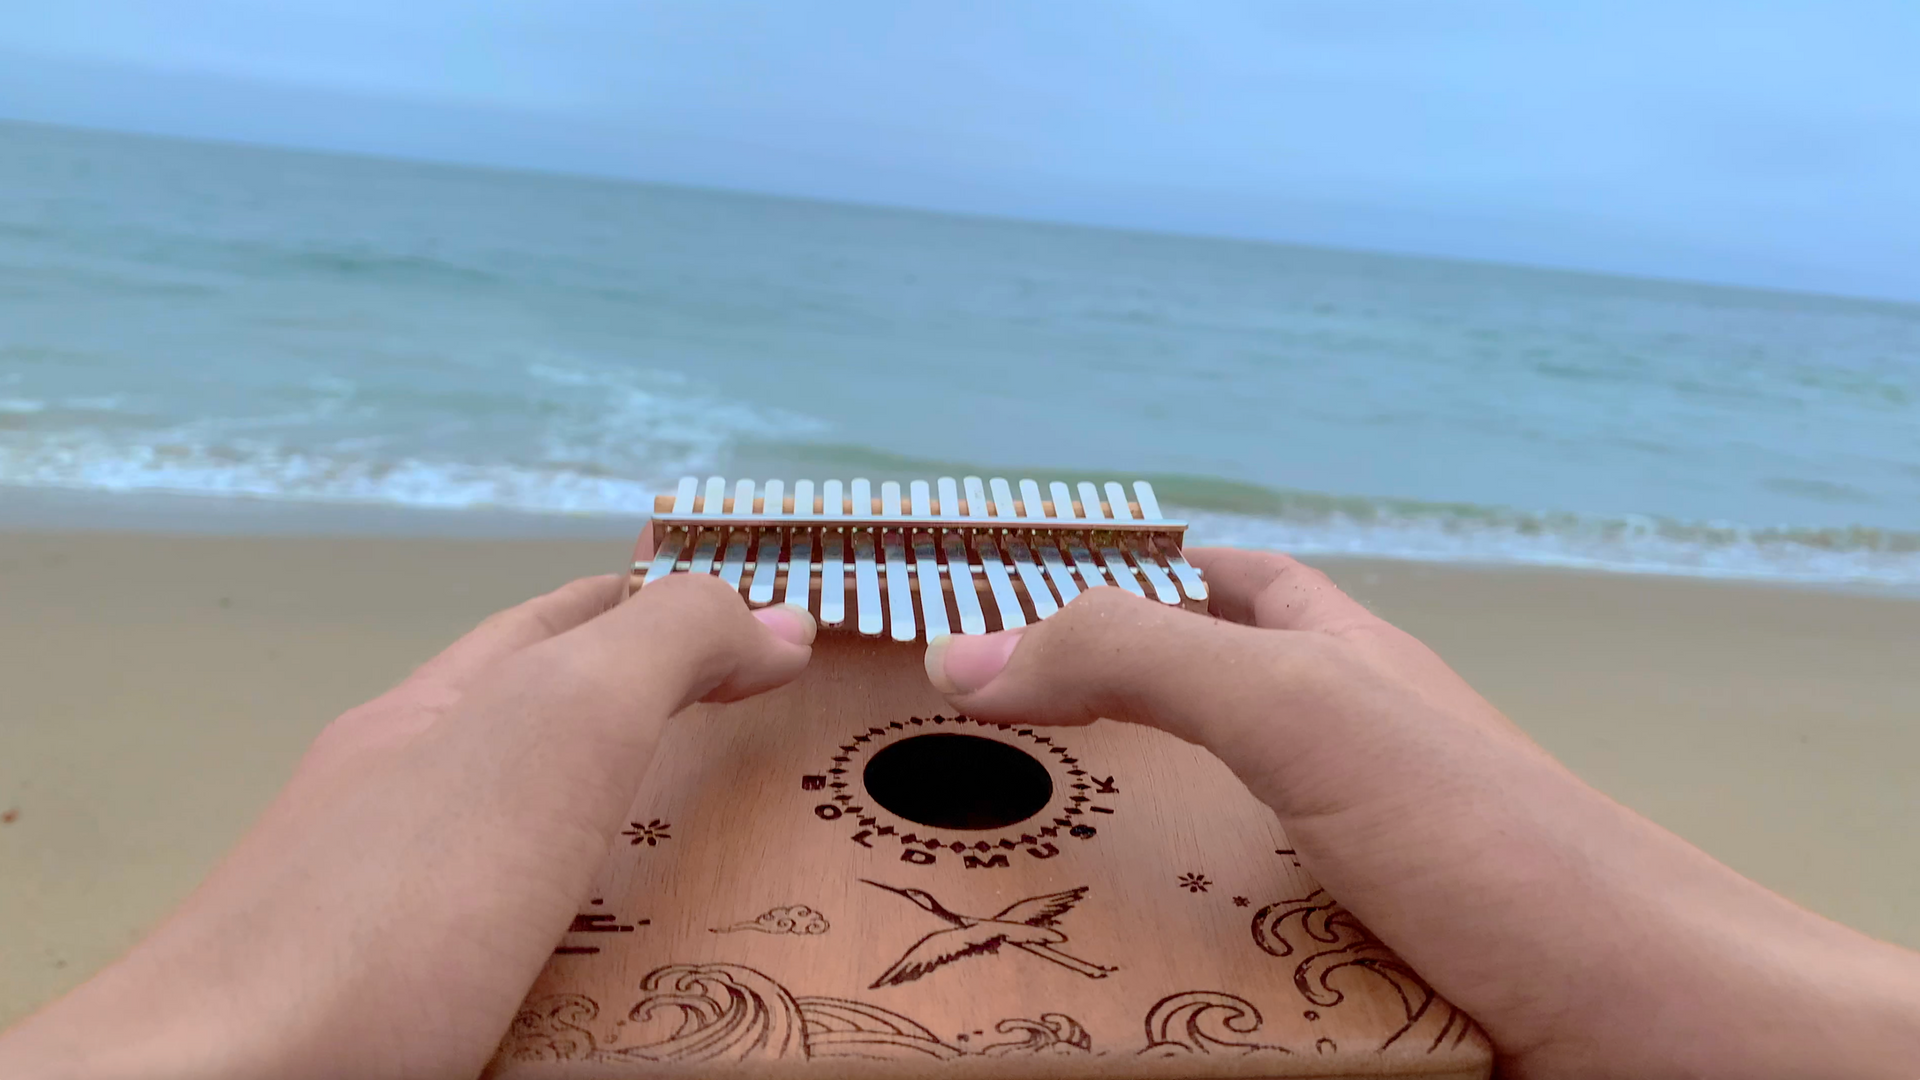 Load video: video of the kalimba playing